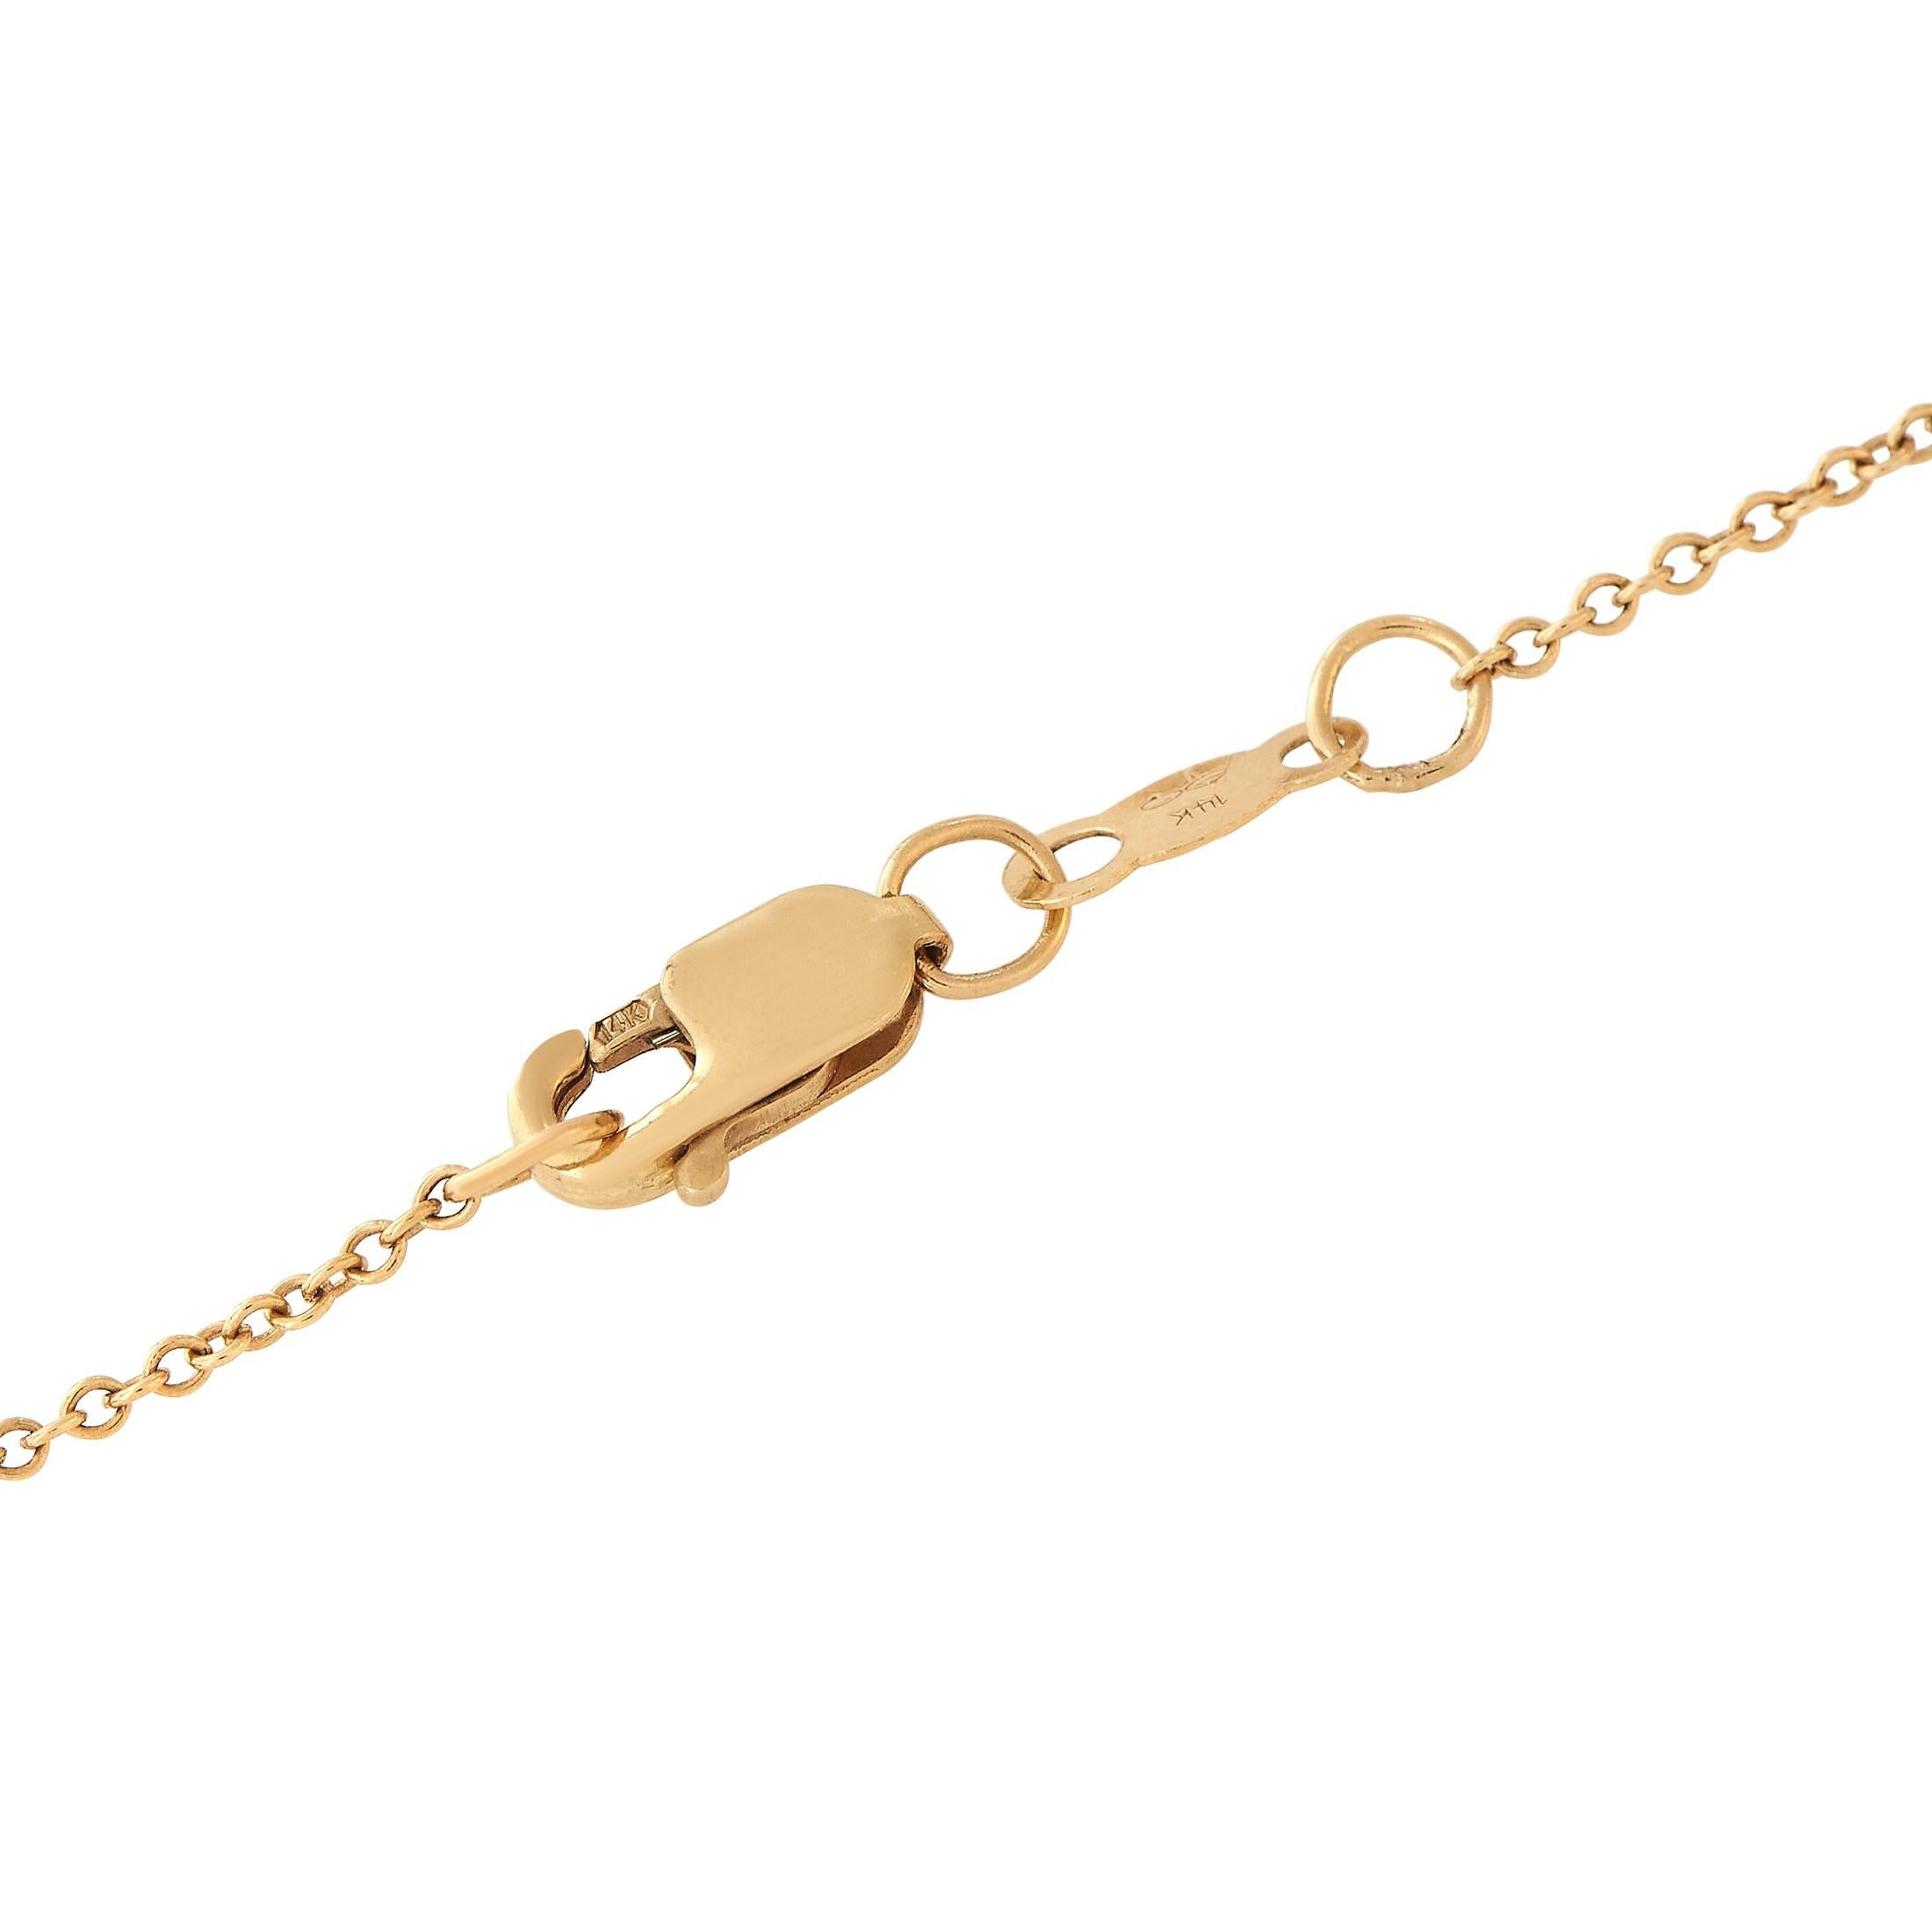 Spell it out and let the world know: you are your own queen. This necklace in 14K yellow gold has the word queen in cursive, traced with petite round diamonds. A sculpted crown embellished with diamonds is also present as a glittering accent.This